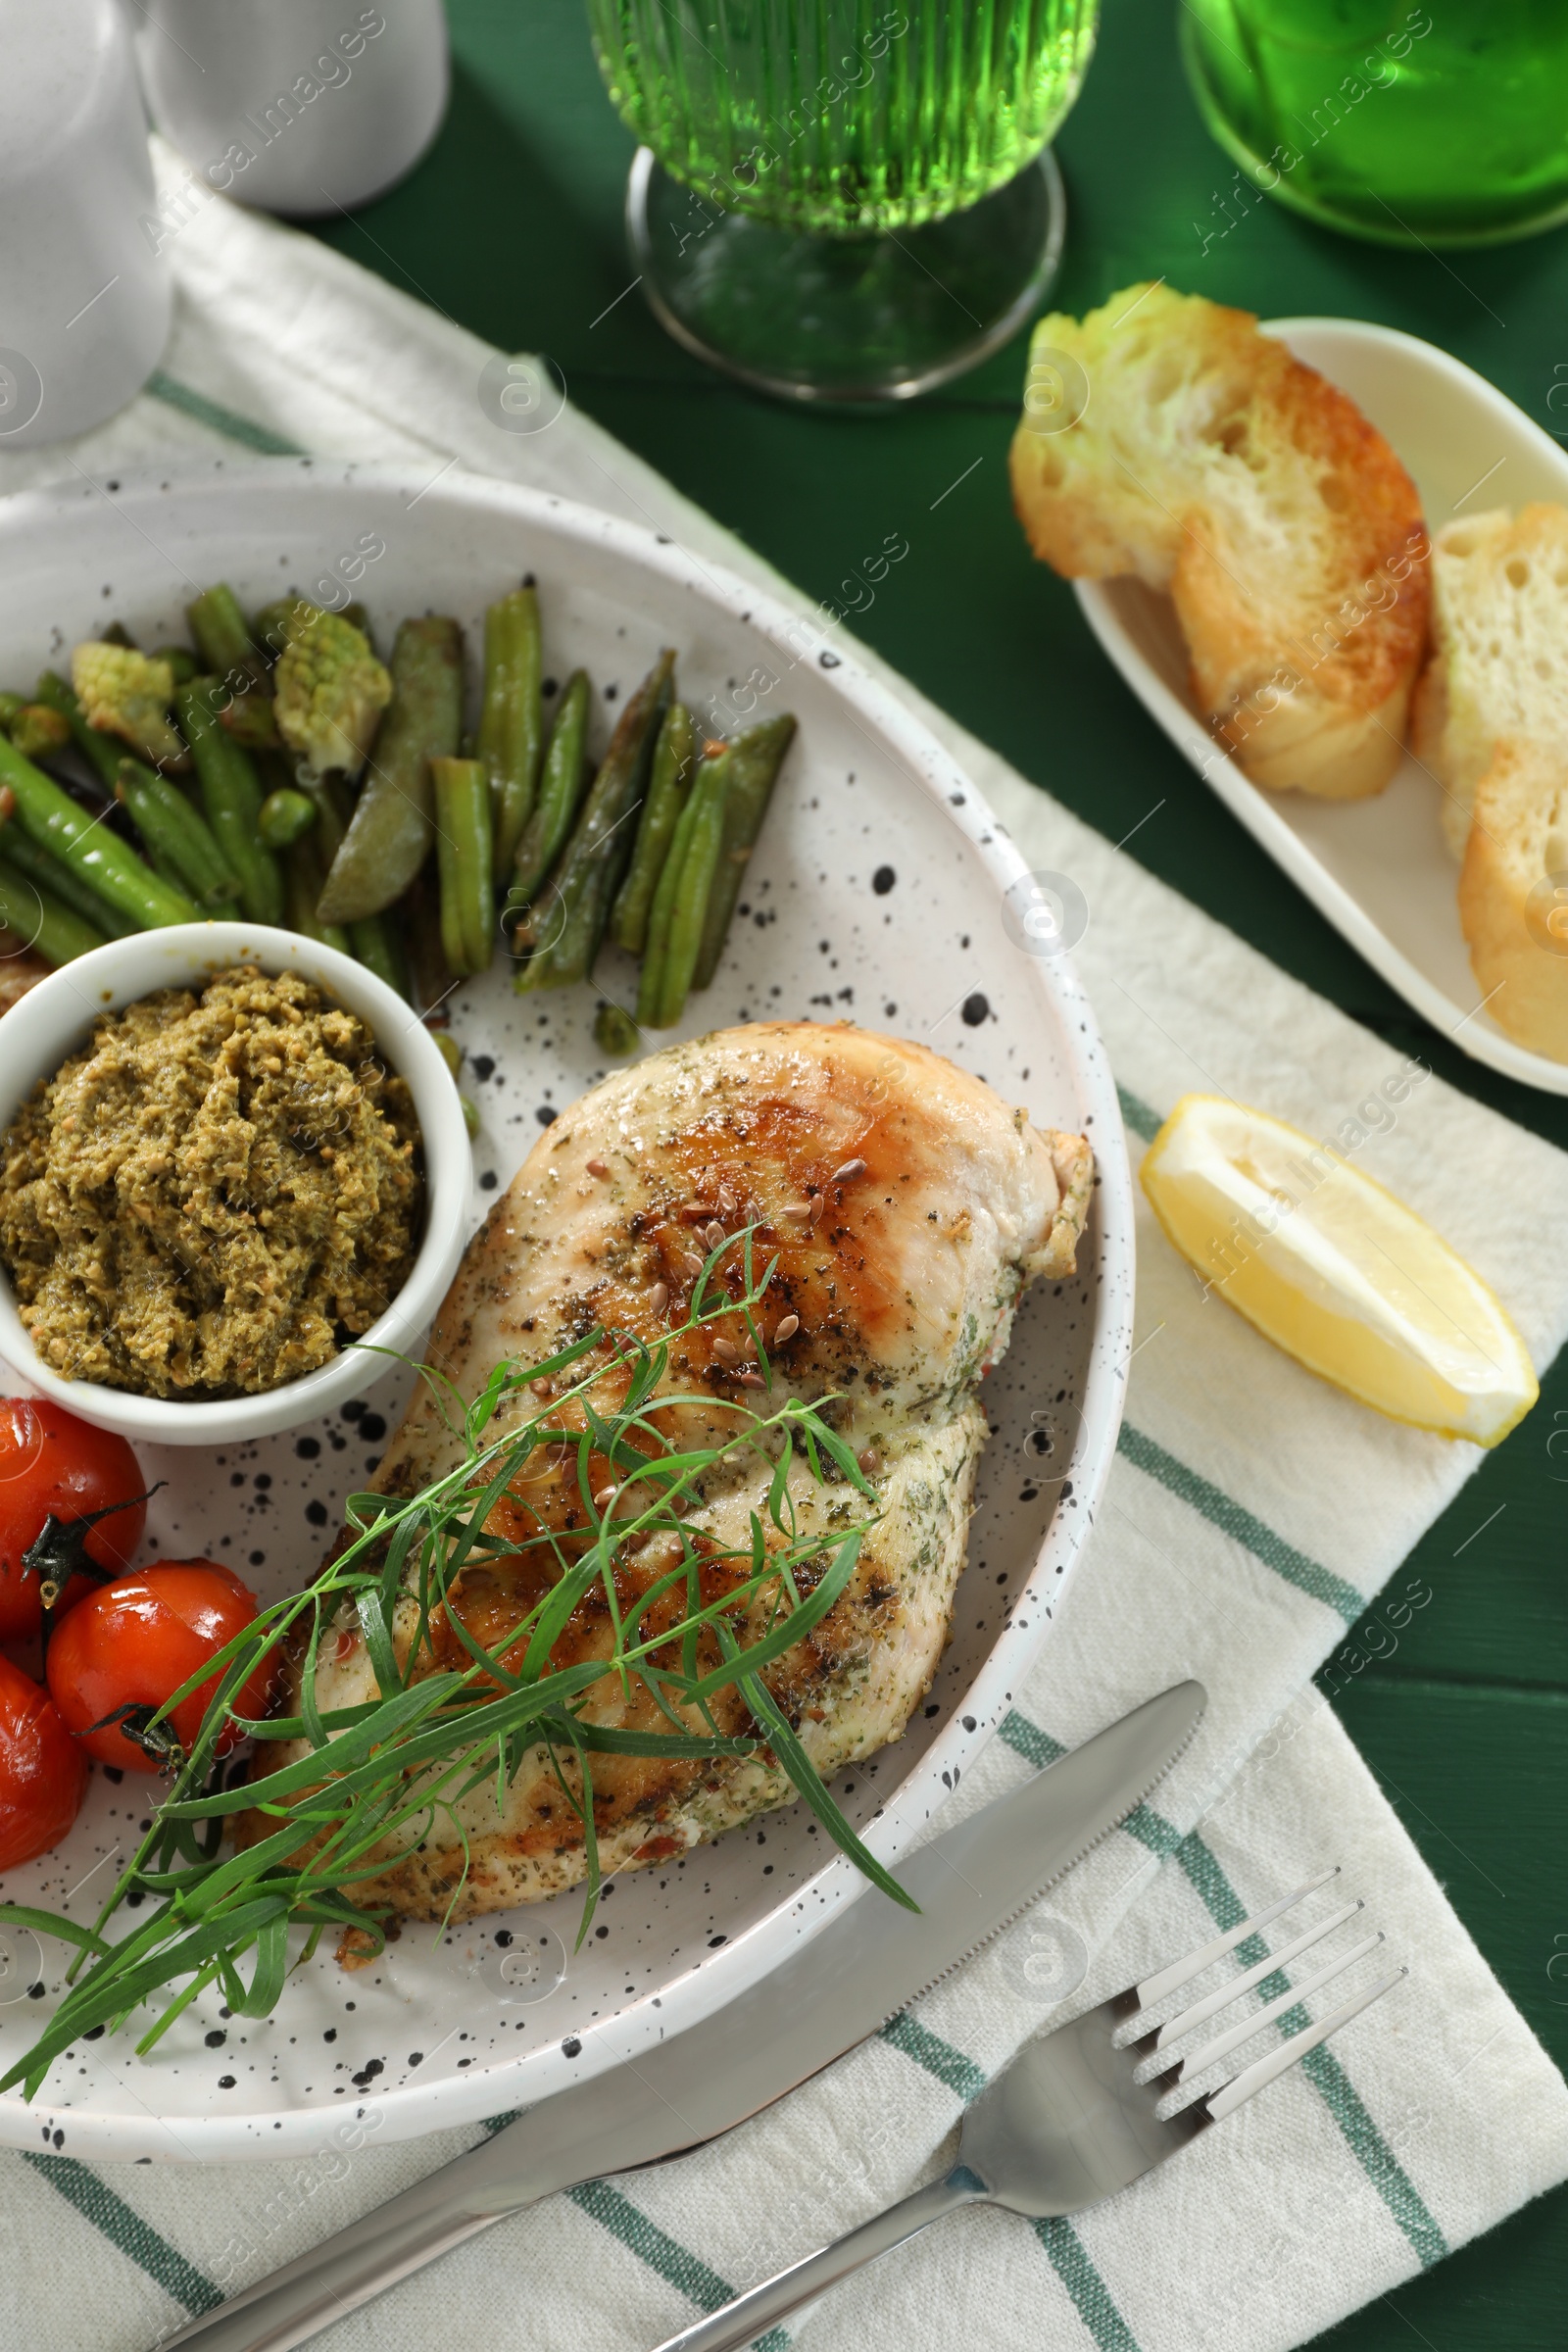 Photo of Tasty chicken, vegetables with tarragon and pesto sauce served on green table, above view